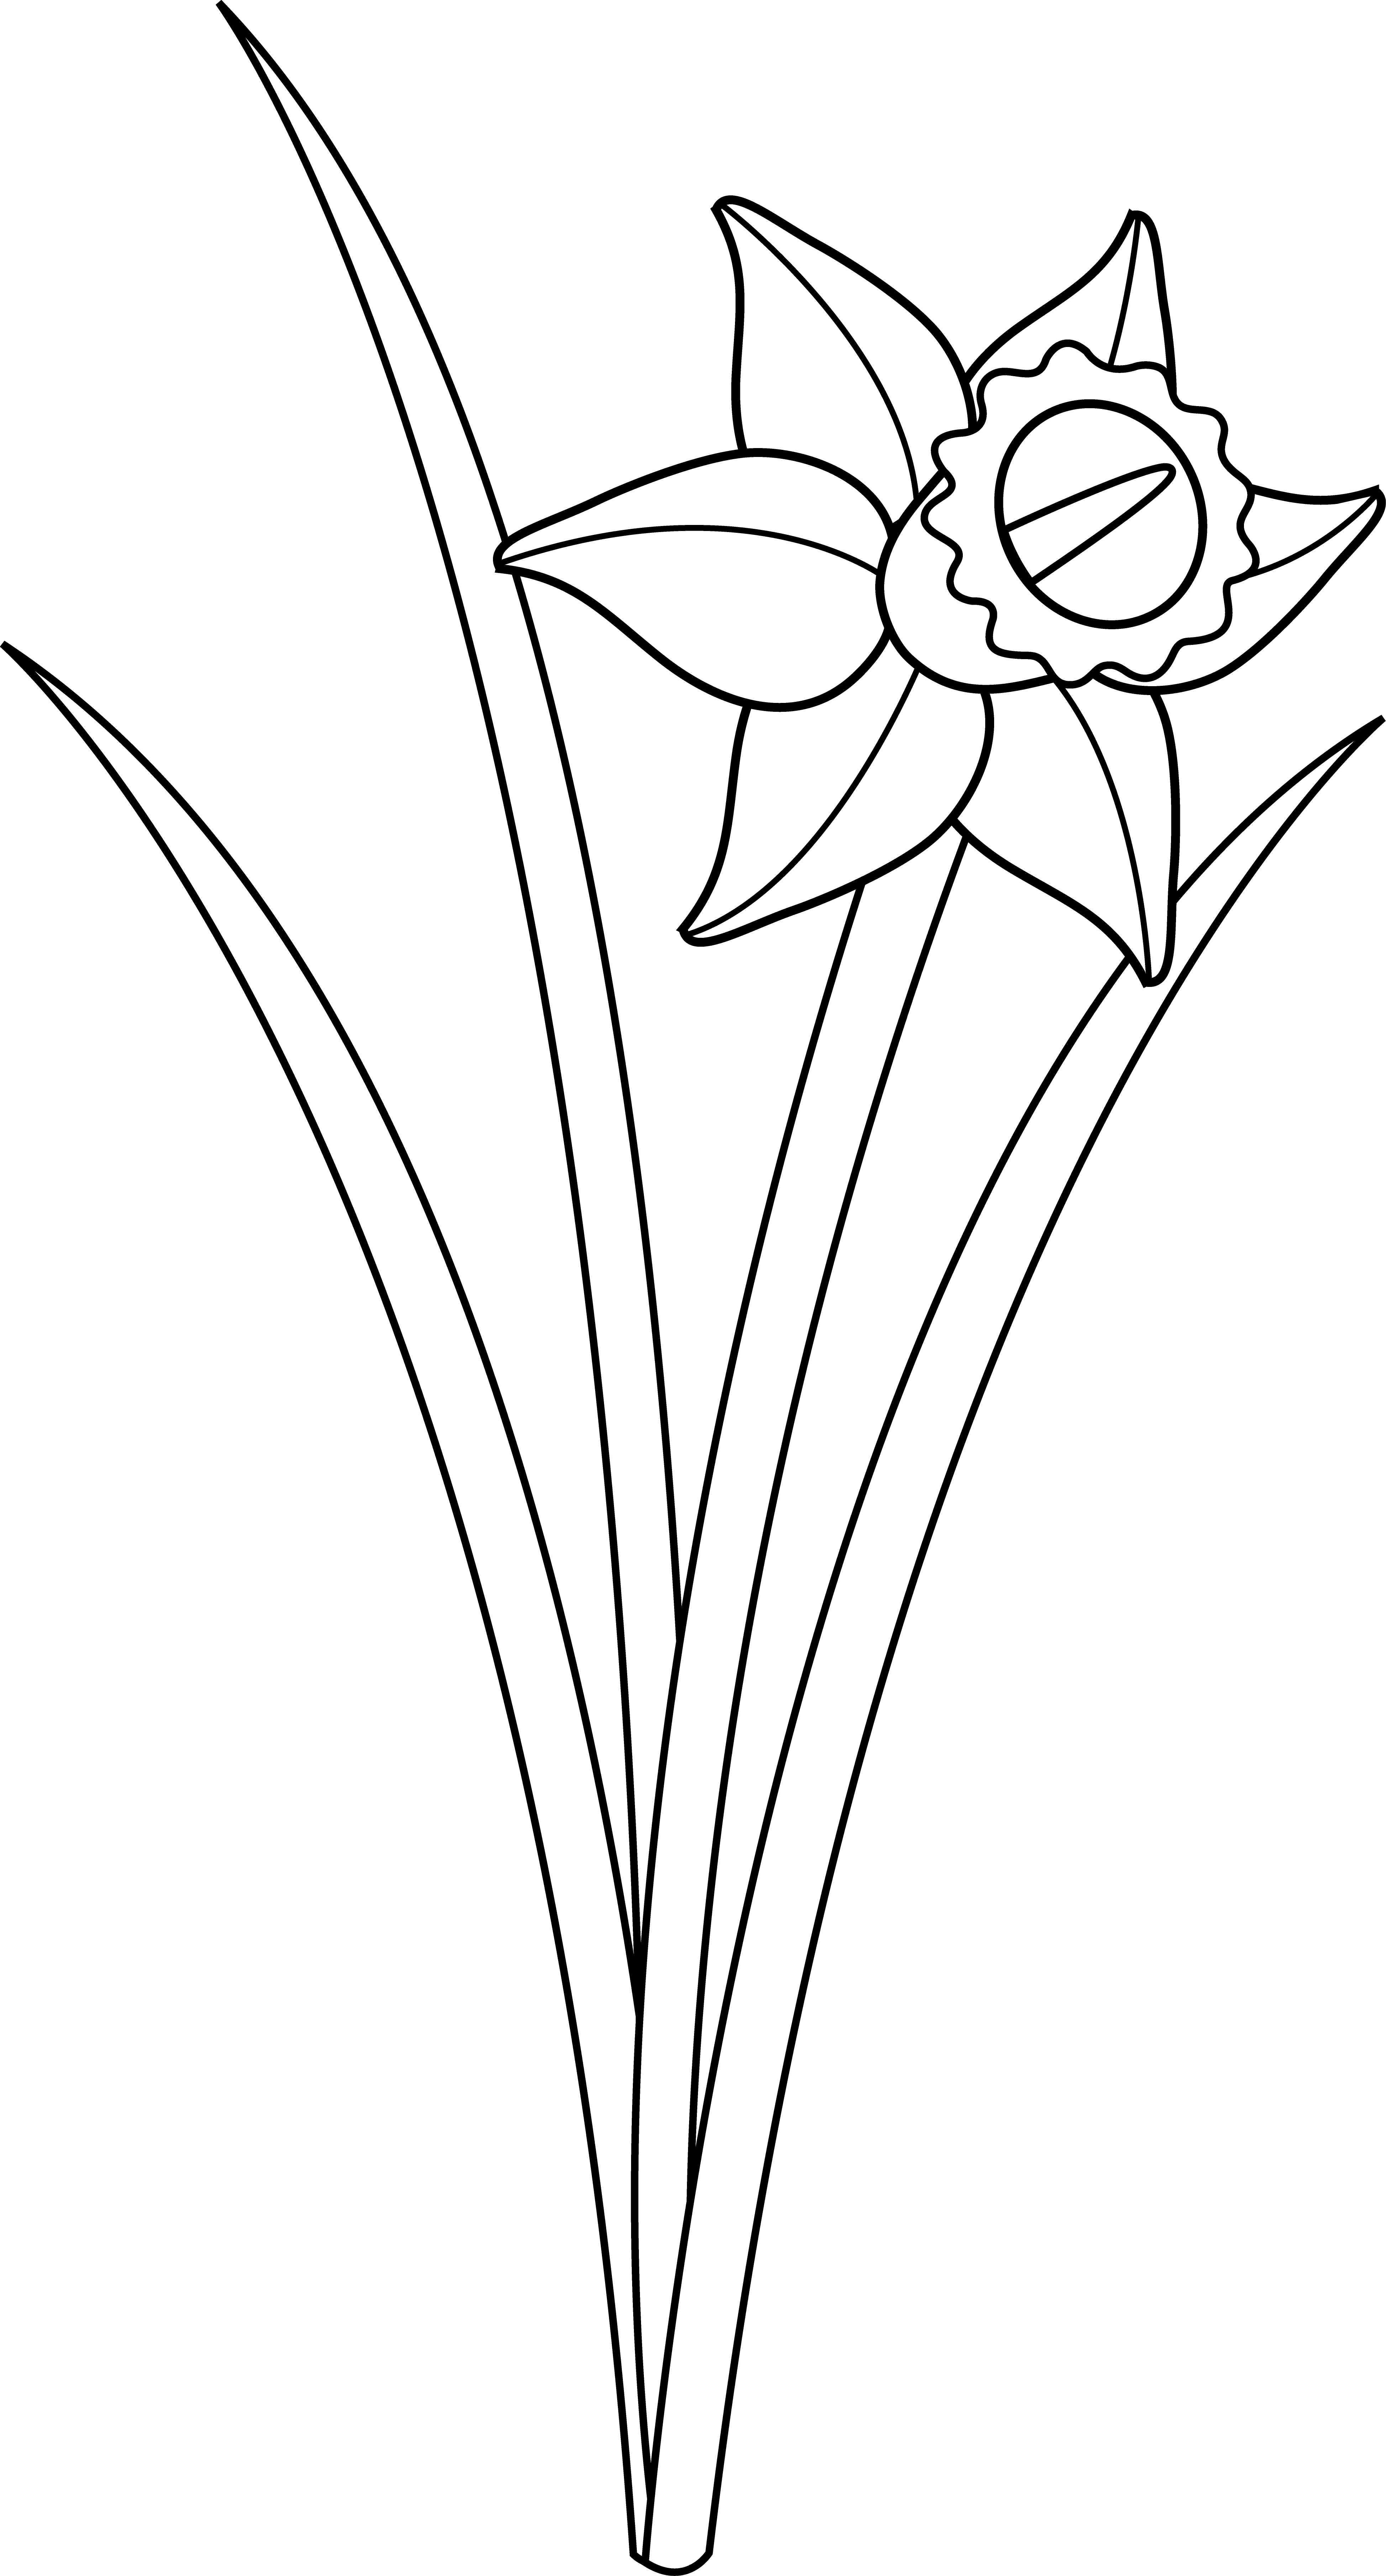 Free Daffodil Black And White, Download Free Daffodil Black And White